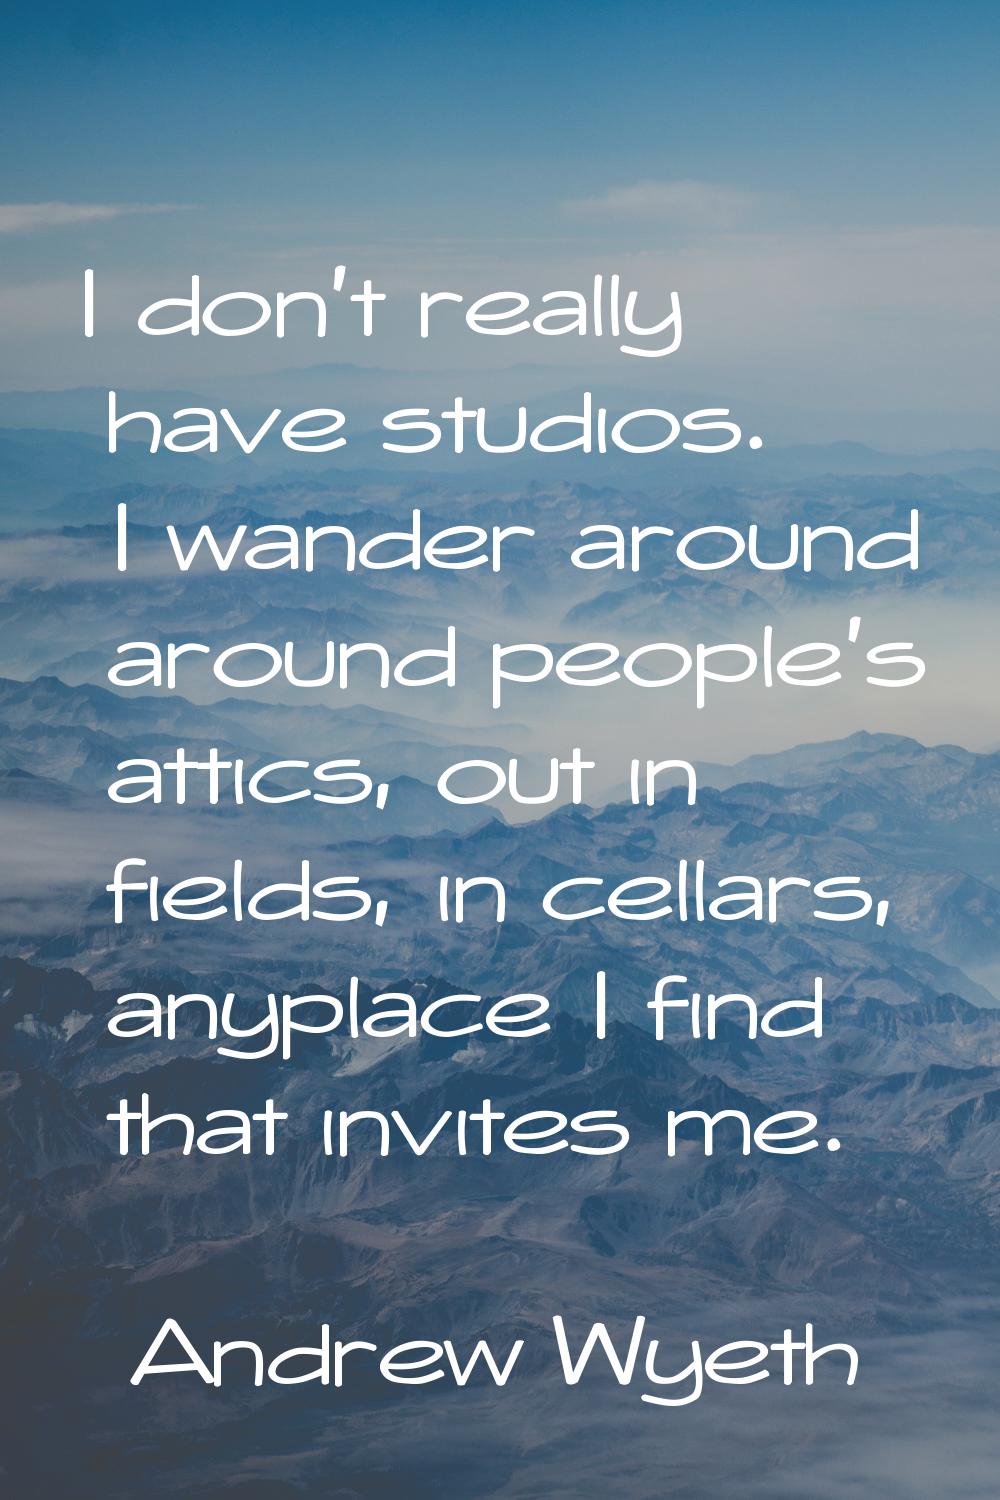 I don't really have studios. I wander around around people's attics, out in fields, in cellars, any